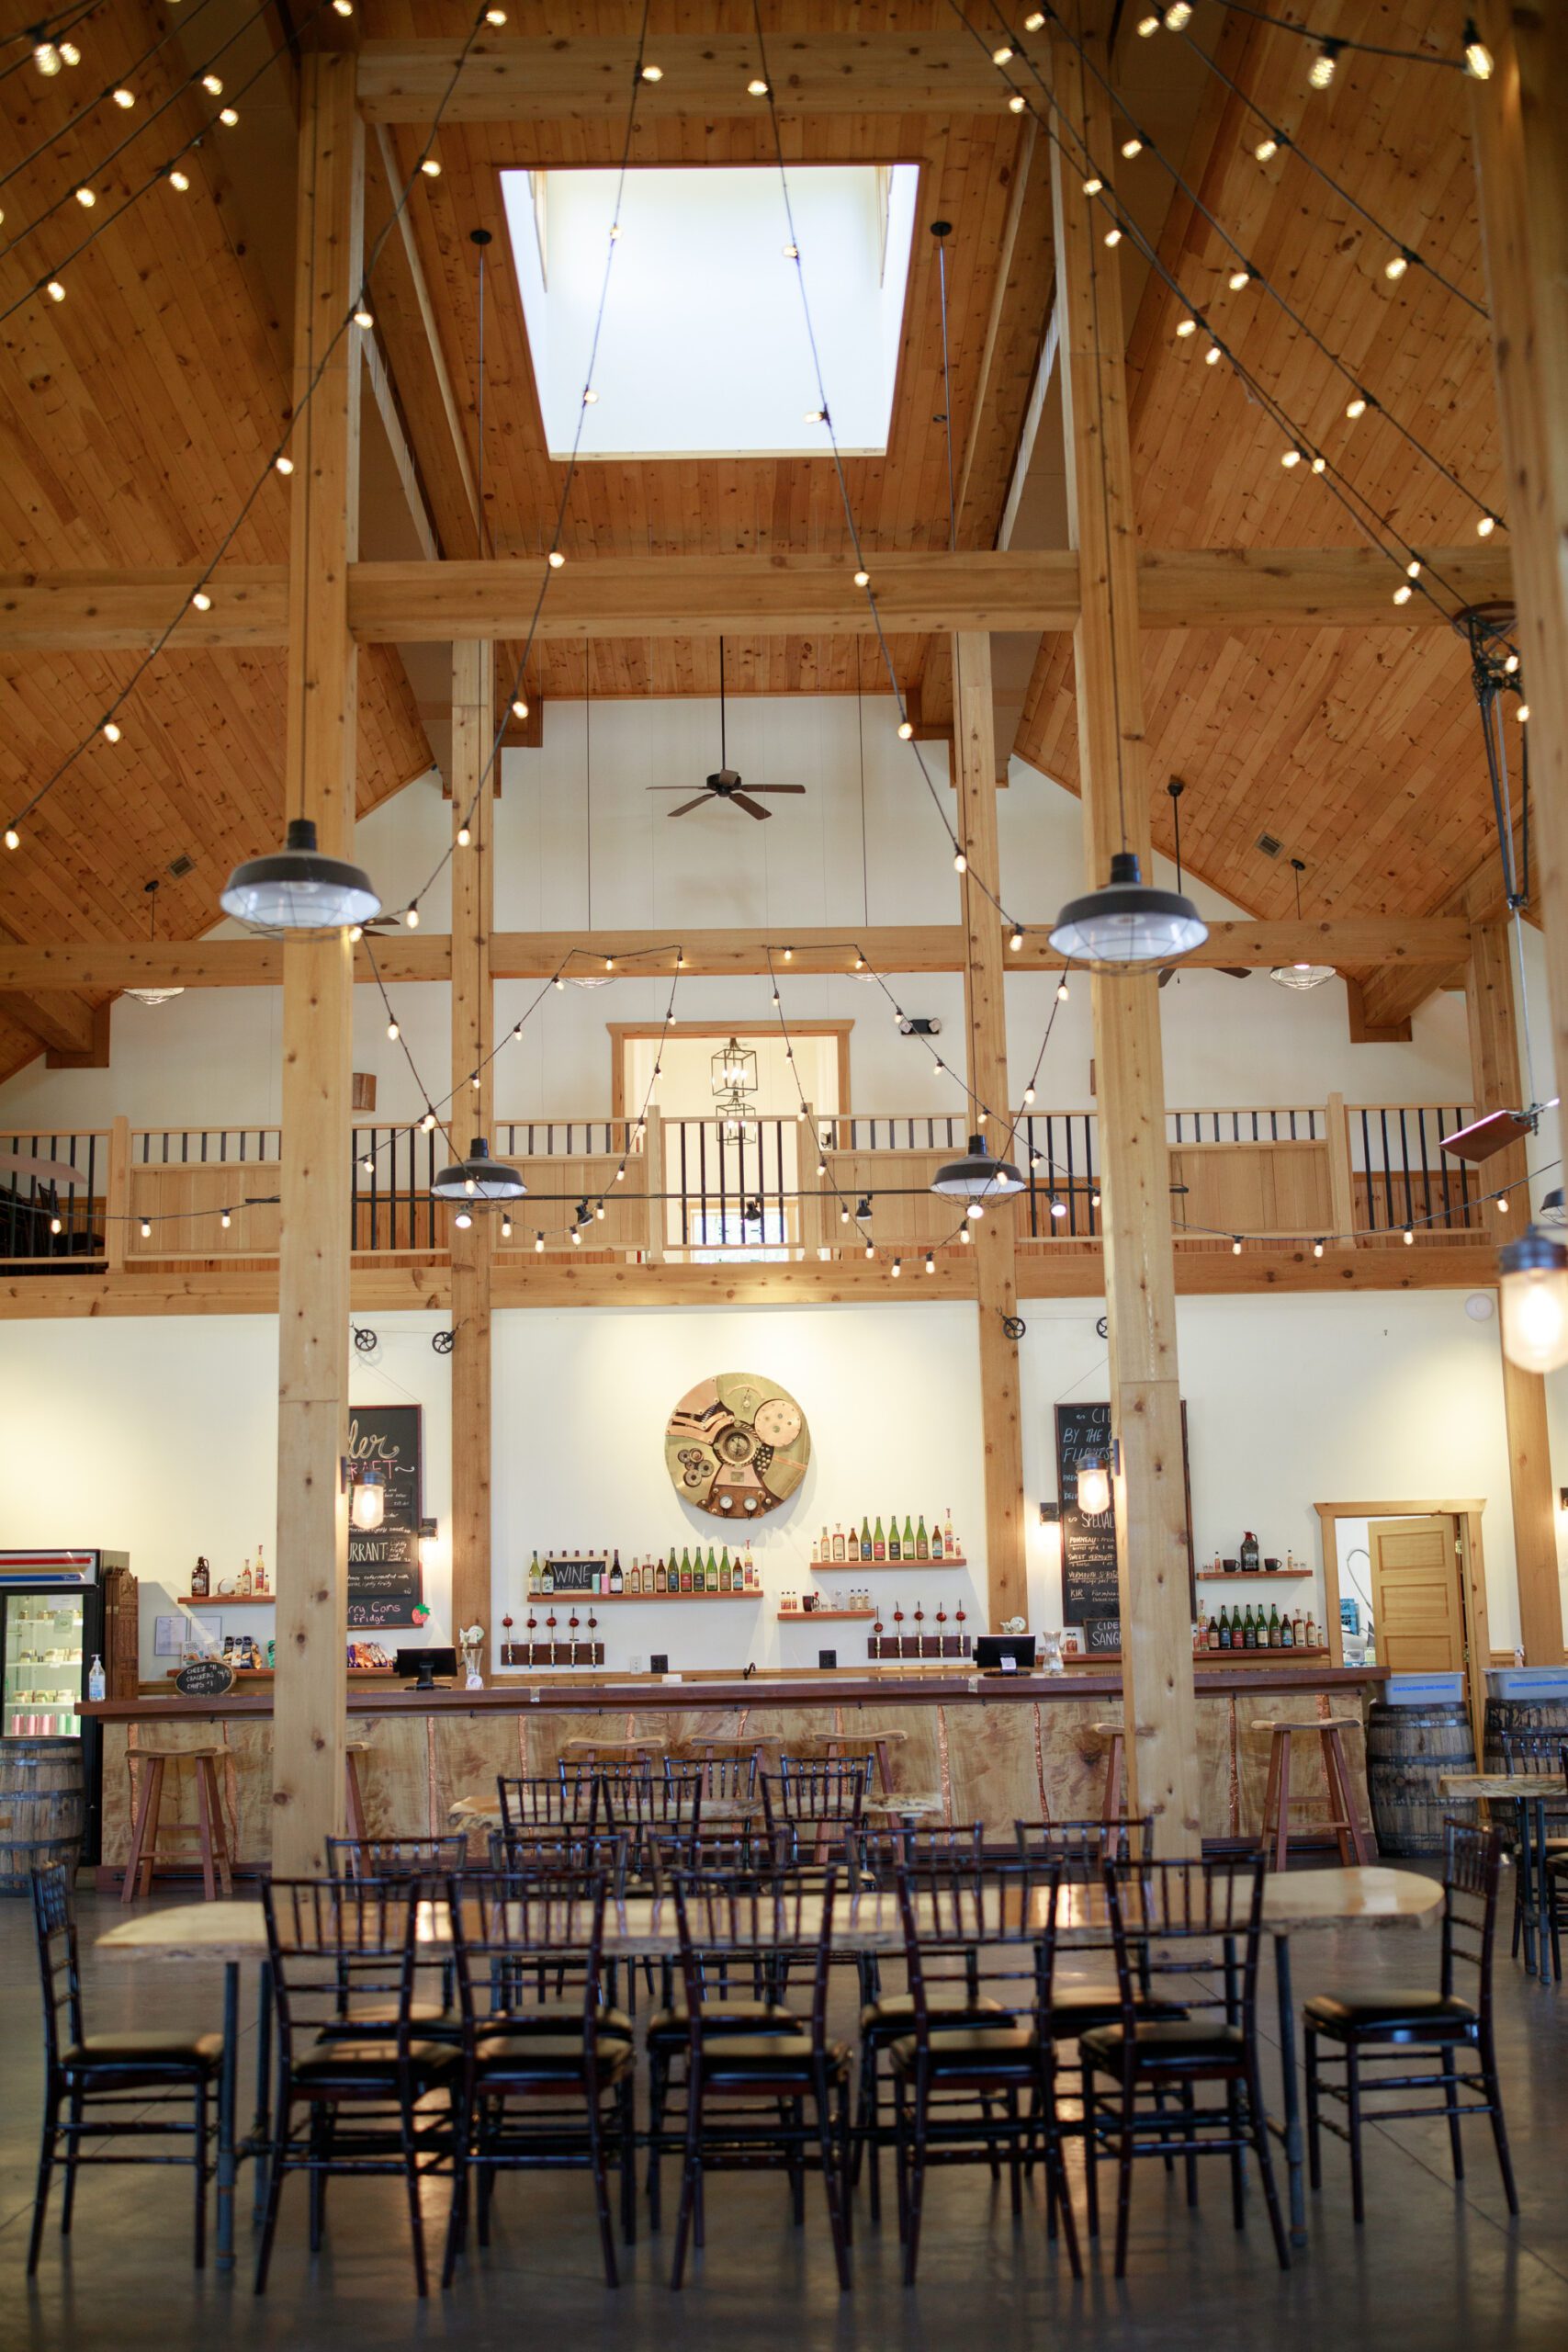 A look from floor to ceiling at the rustic yet modern cider barn.